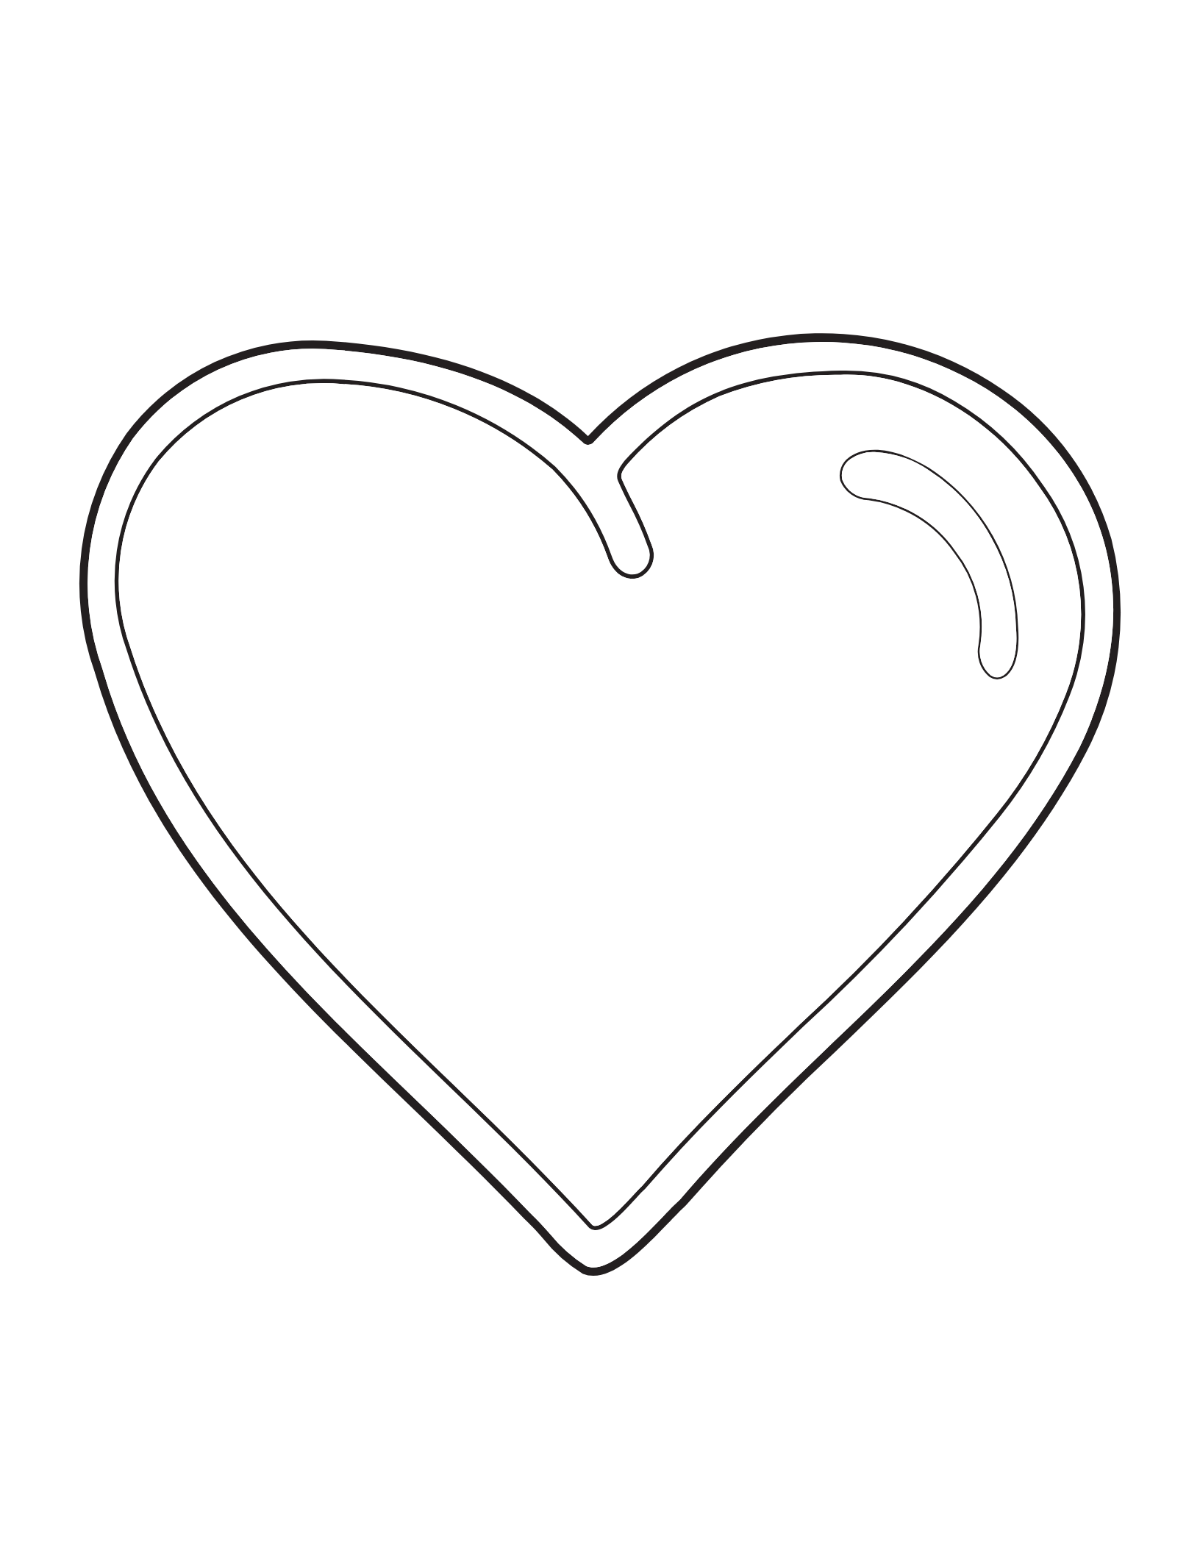 Heart Shape Outline Coloring Page Template